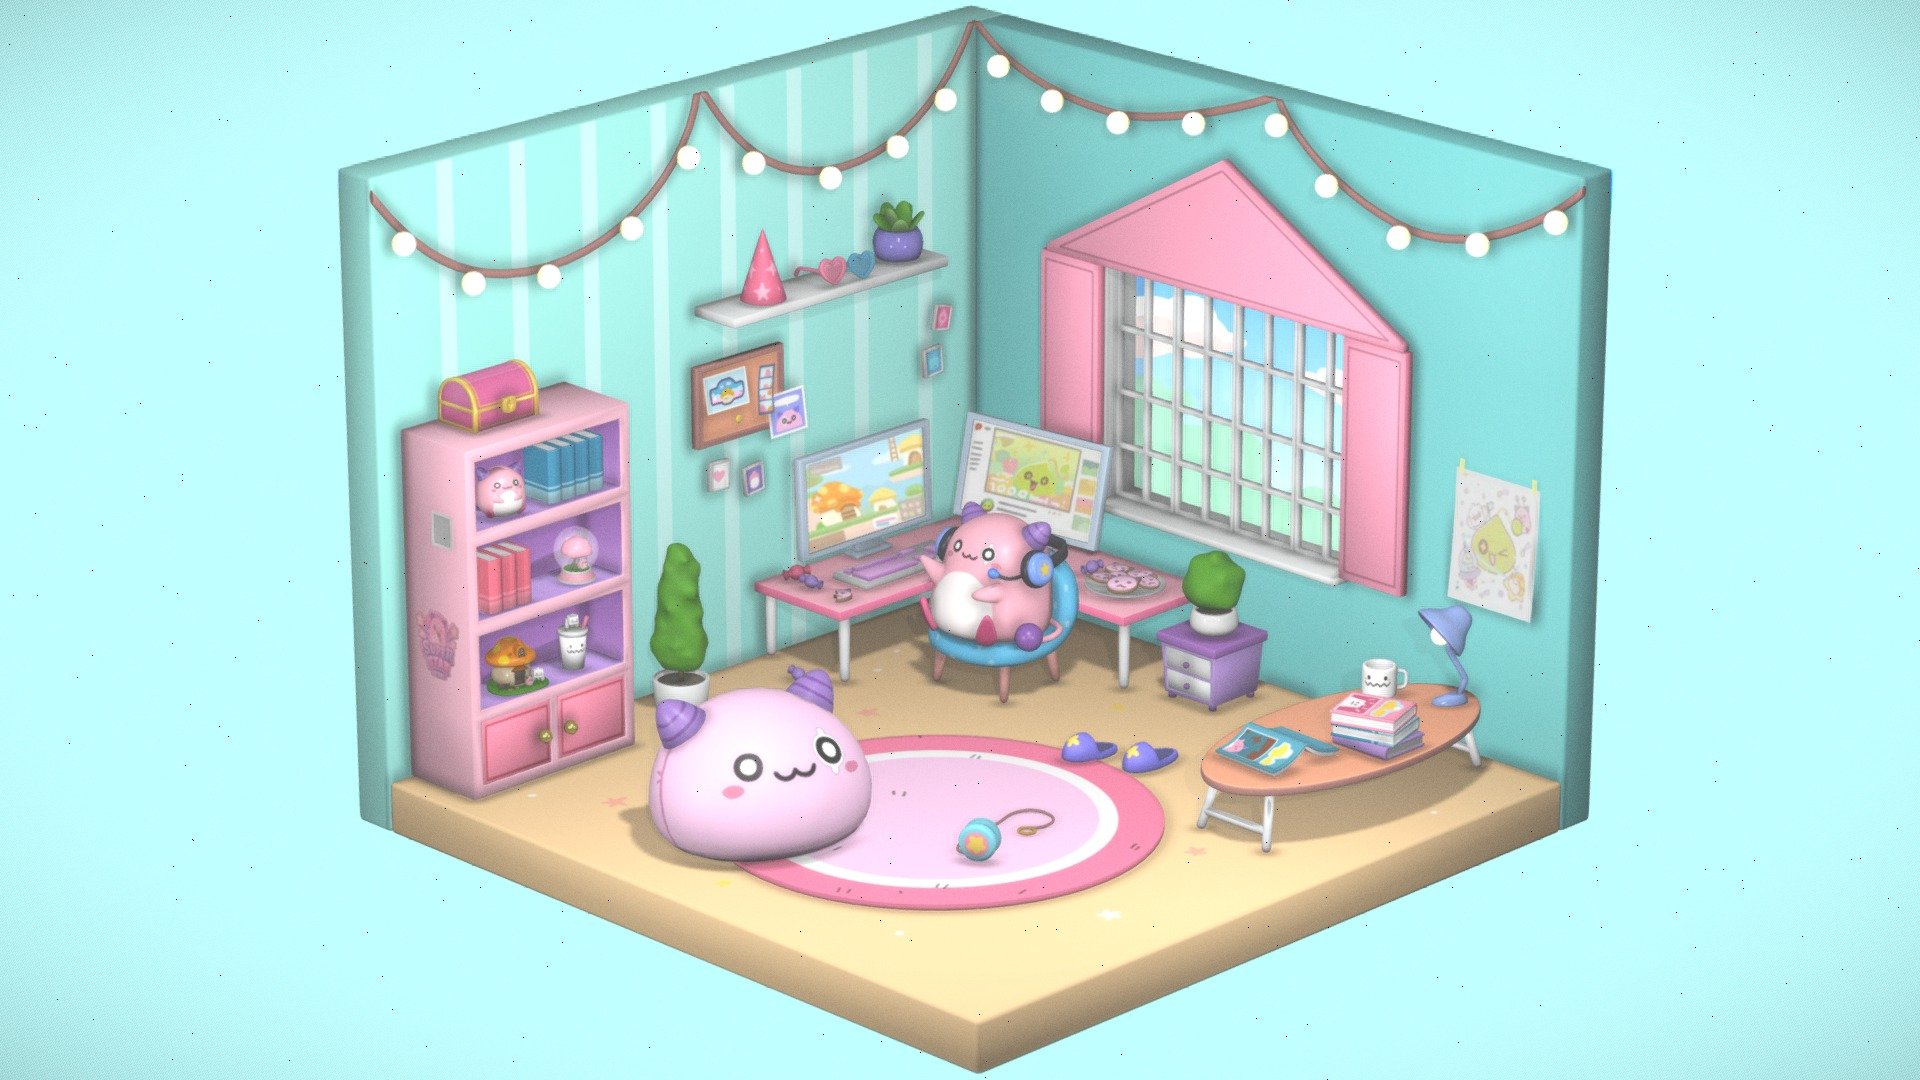 Pinkbean's bedroom from game Maplestory.

Original art by @pink_pinkbean.

 - Pinkbean's Room - 3D model by passerby3d 3d model